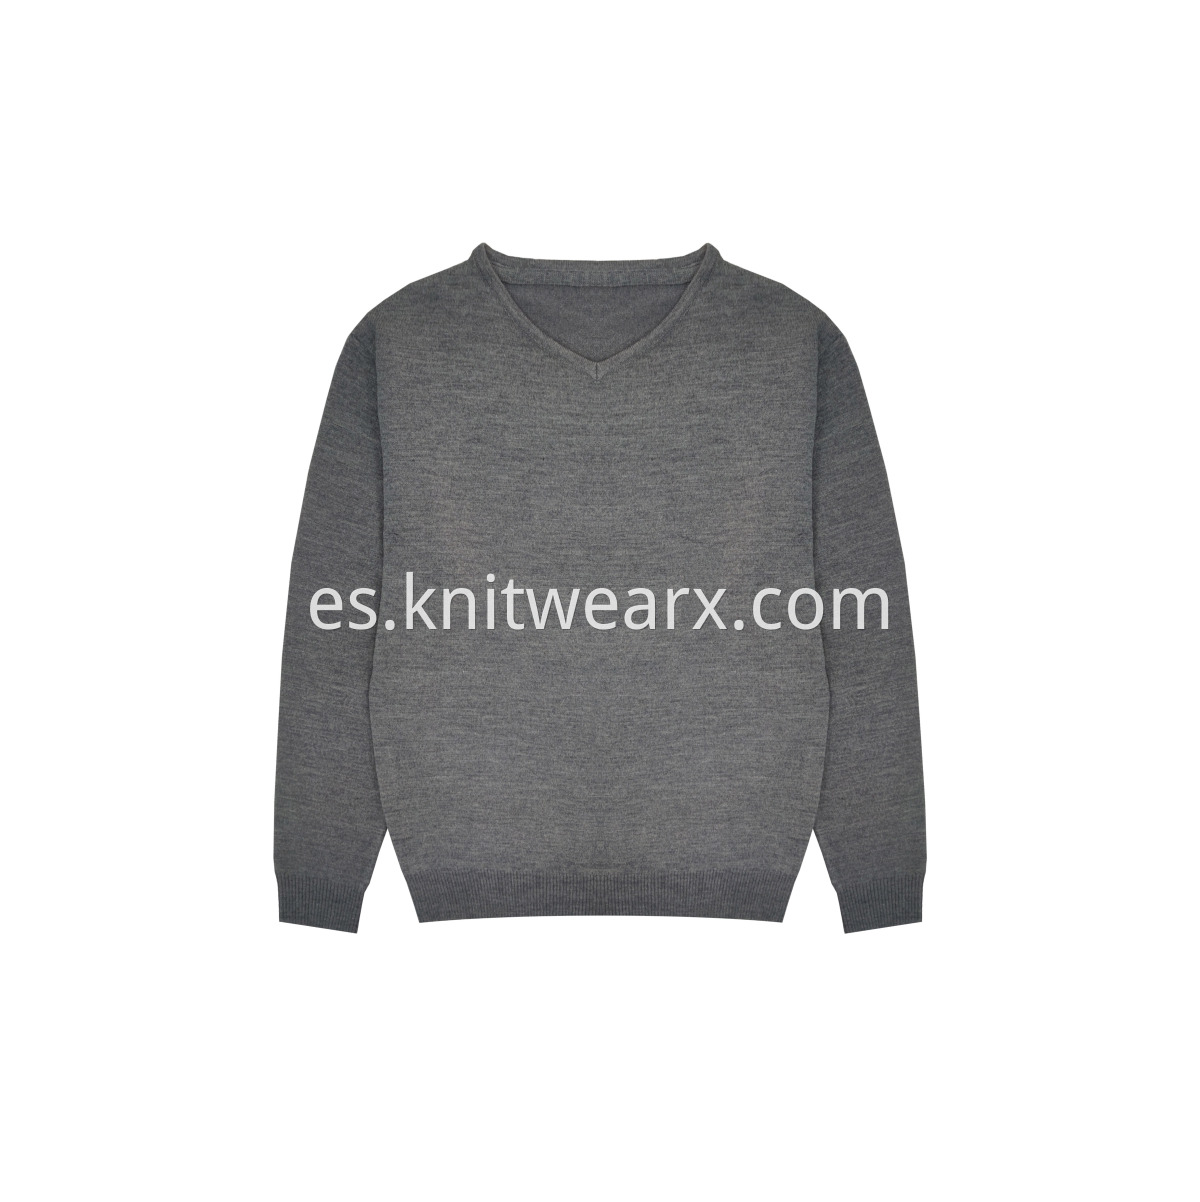 Men's Knitted Warm Sweater V-neck Wool Blend Pullover